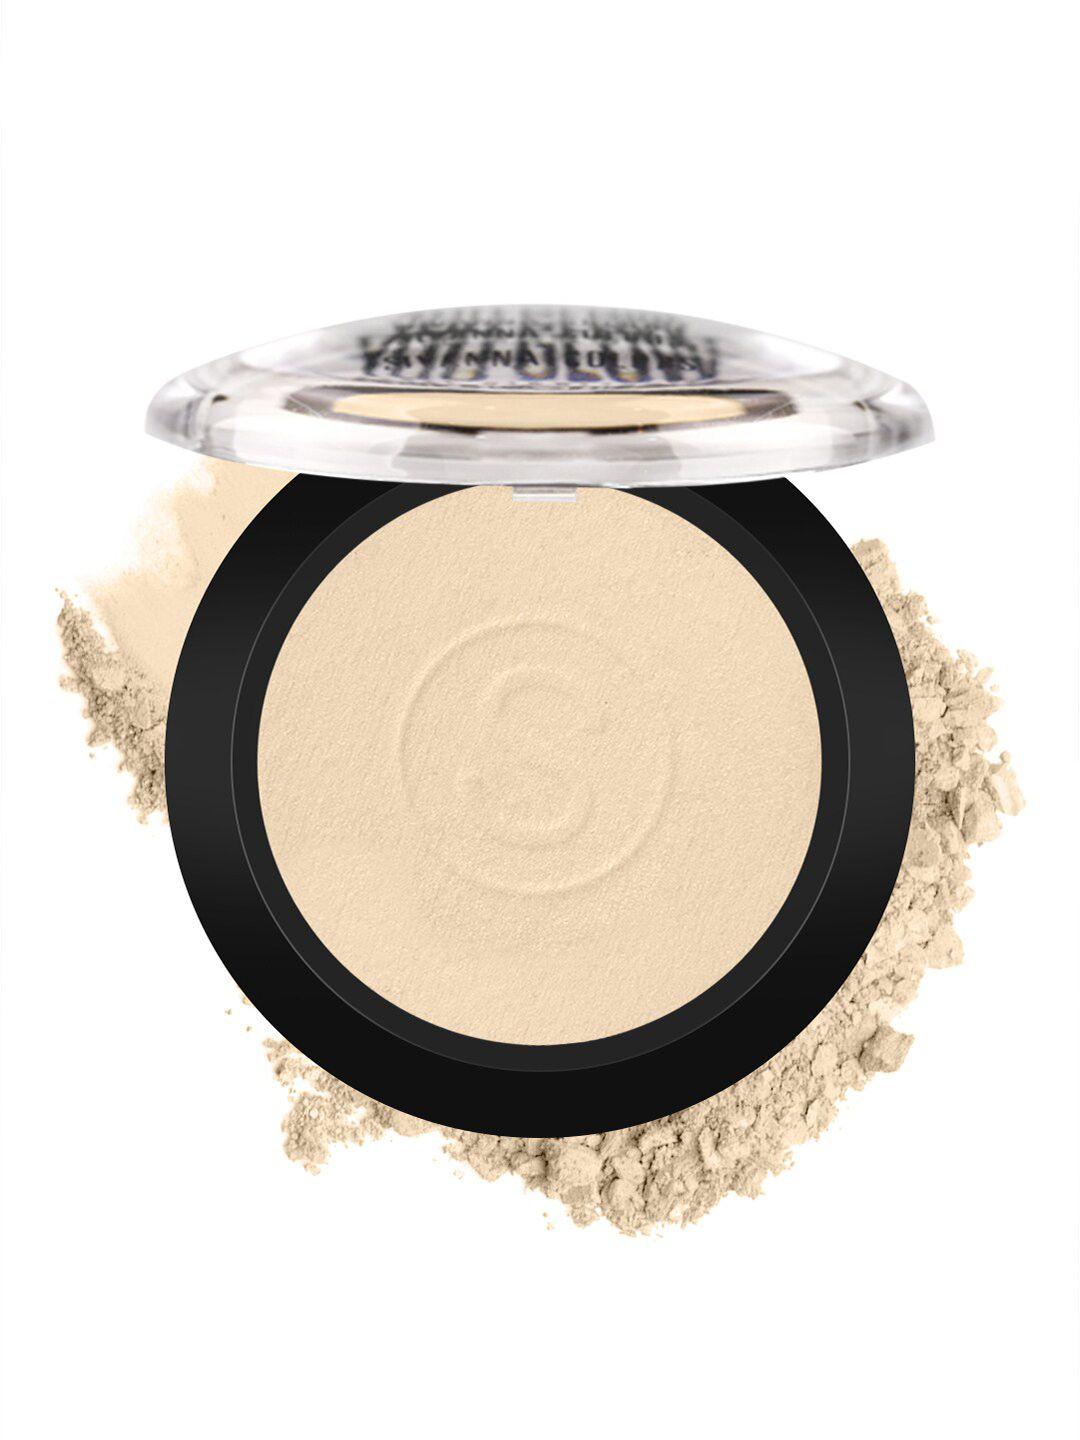 sivanna colors you glow bounce highlighter - hf6012 03